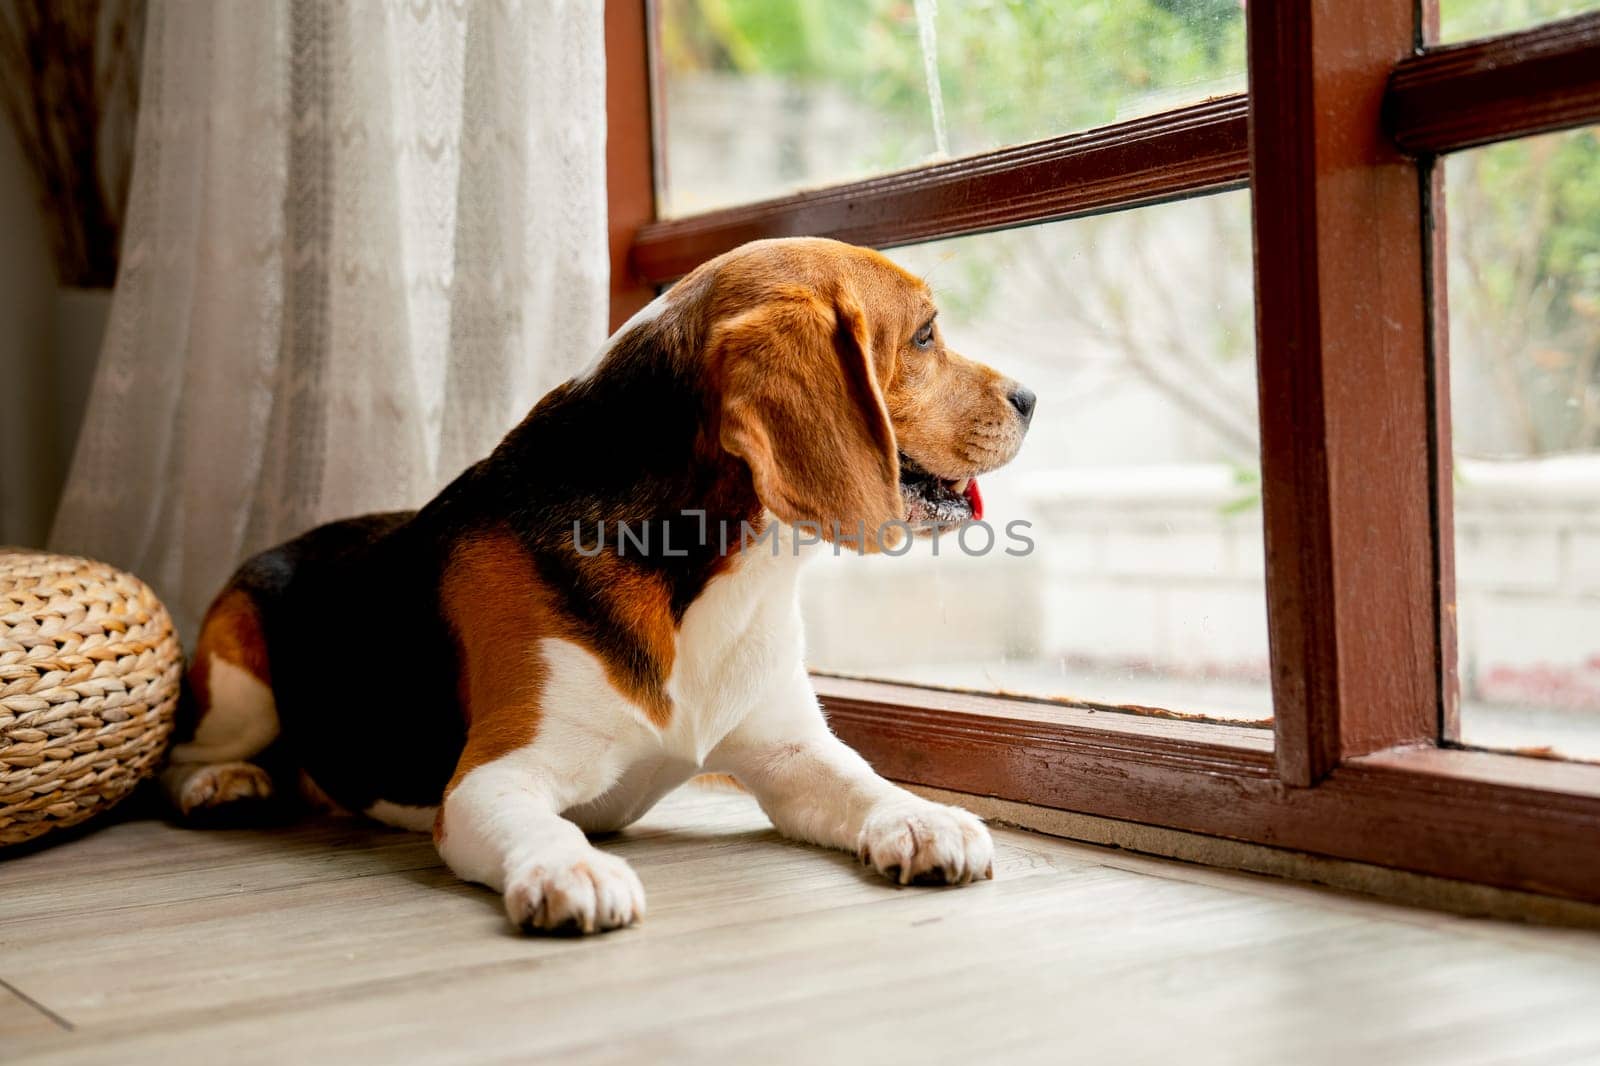 One beagle dog sit with relax in front of glass window or door in house with day light and dog look outside. by nrradmin